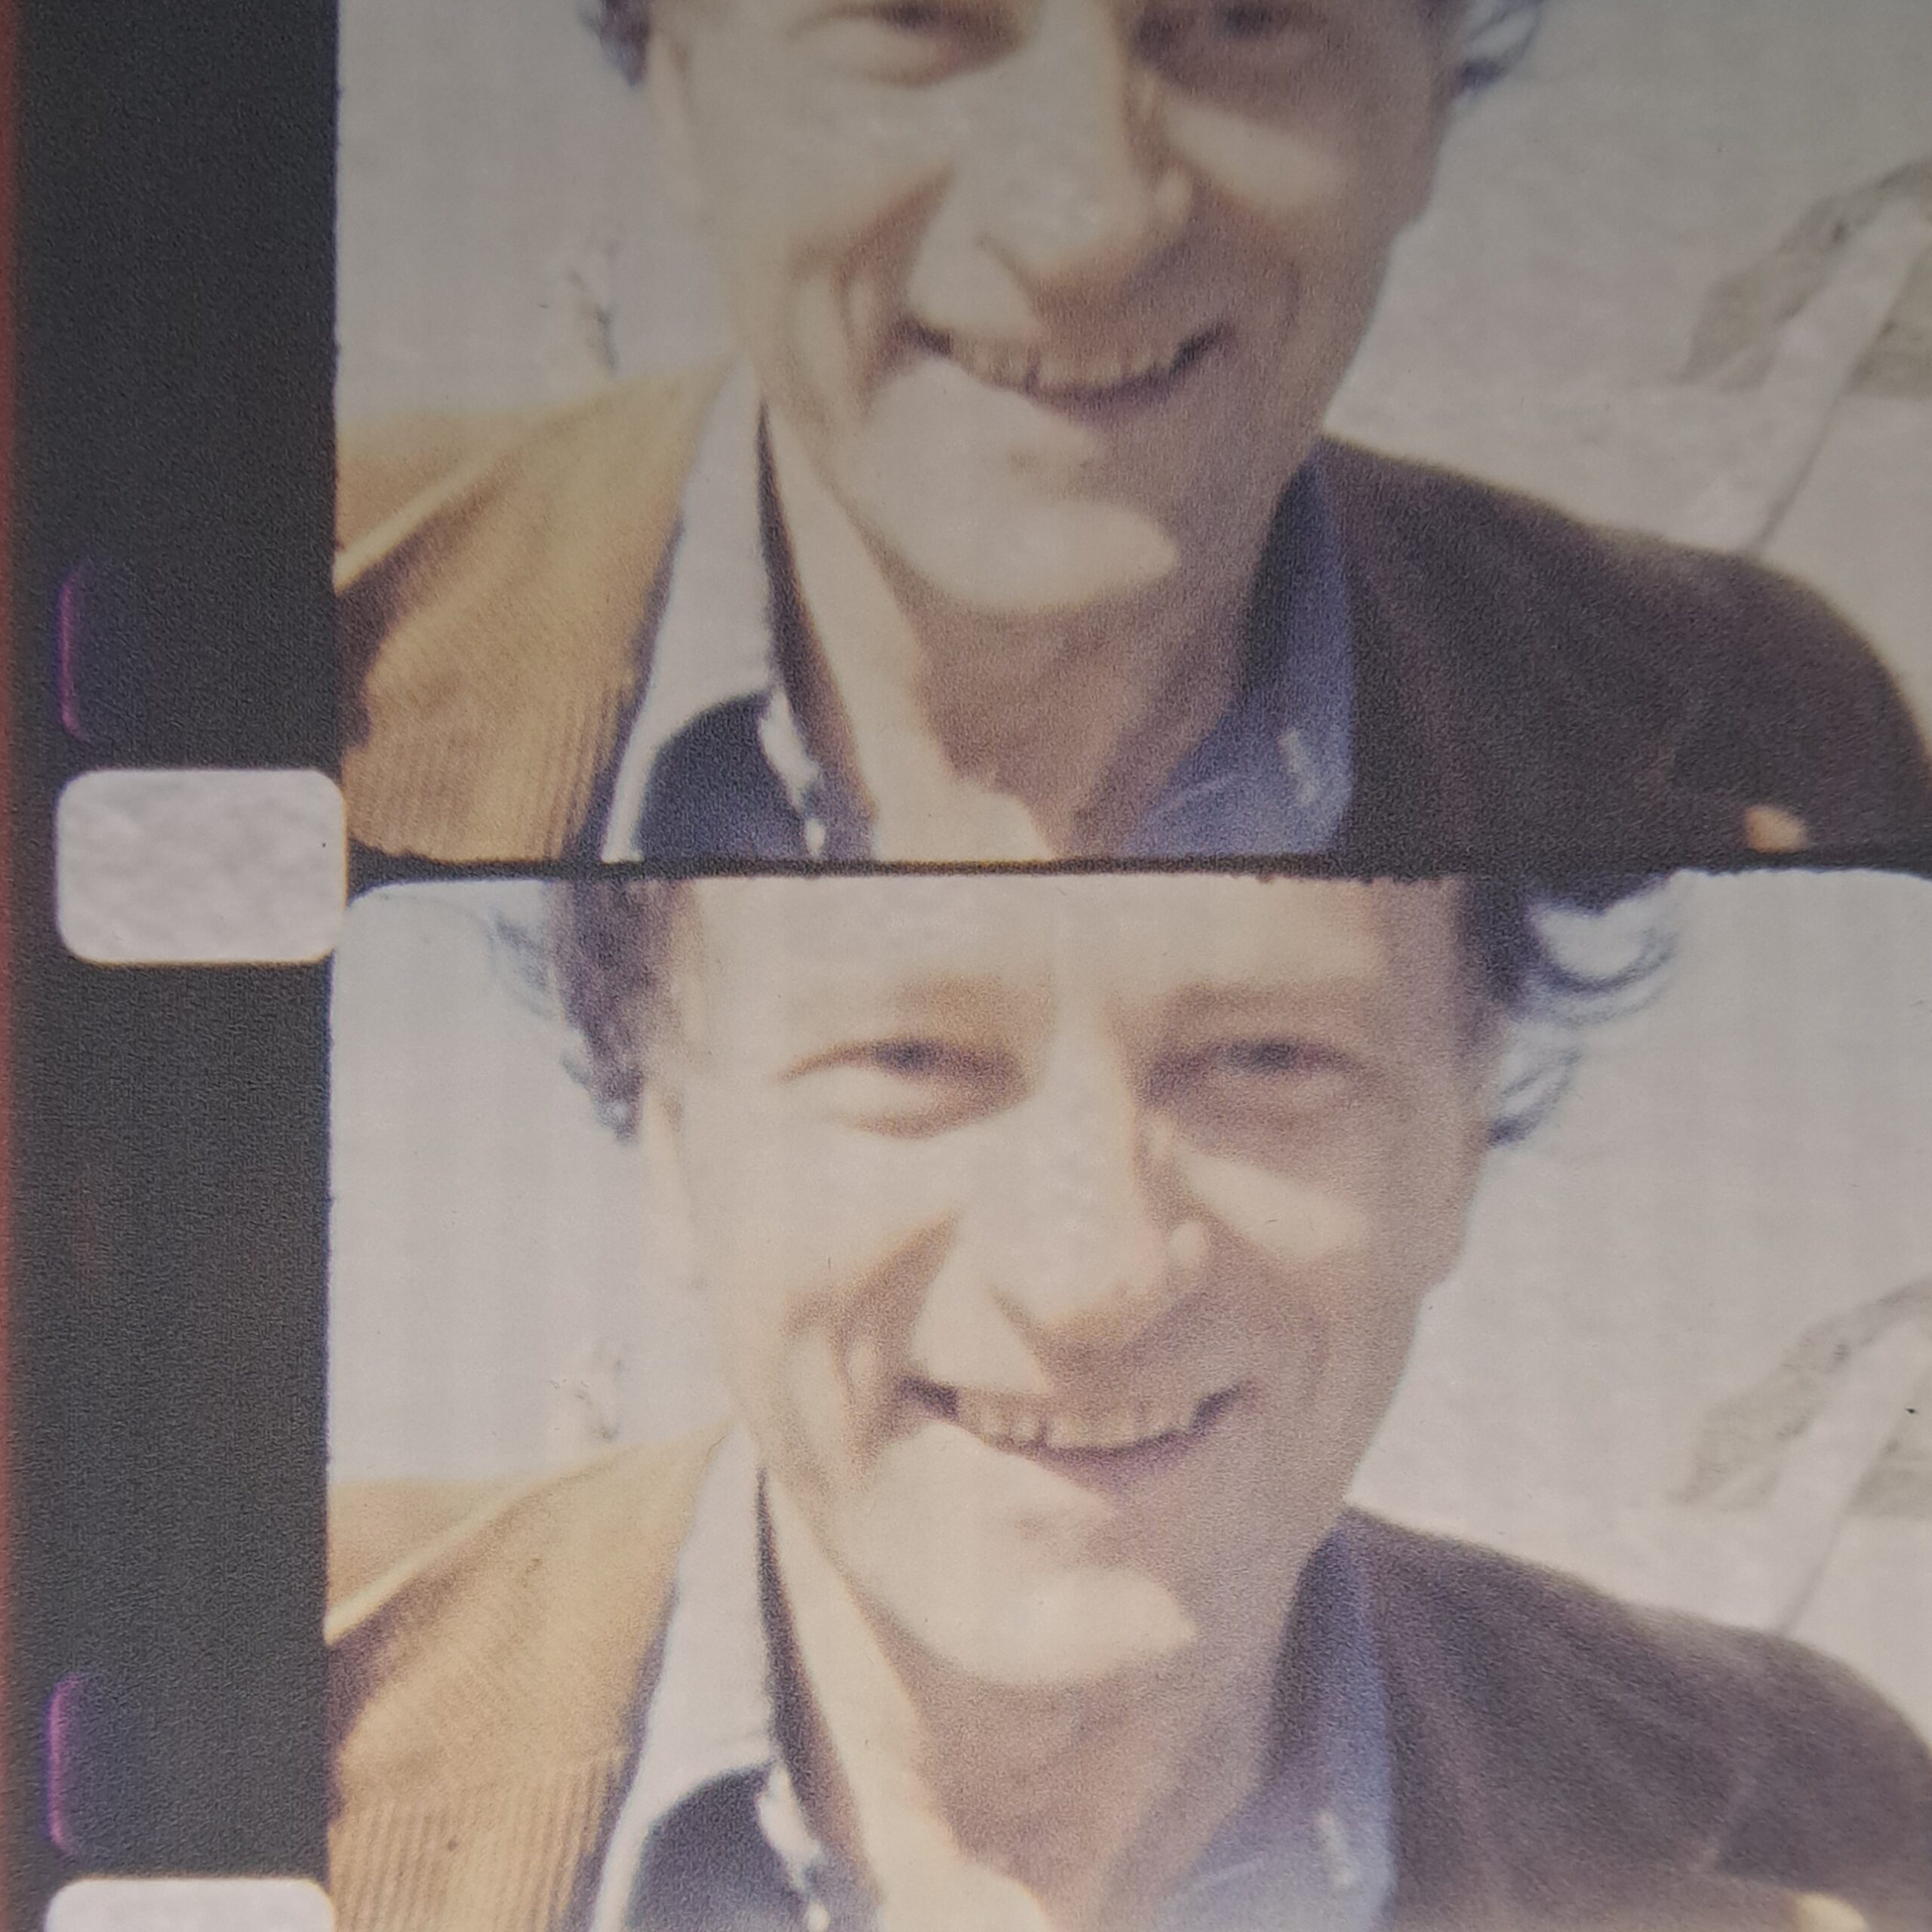 Frames from the film "In an instant it all came back to me" (1950-2015) by Jonas Mekas